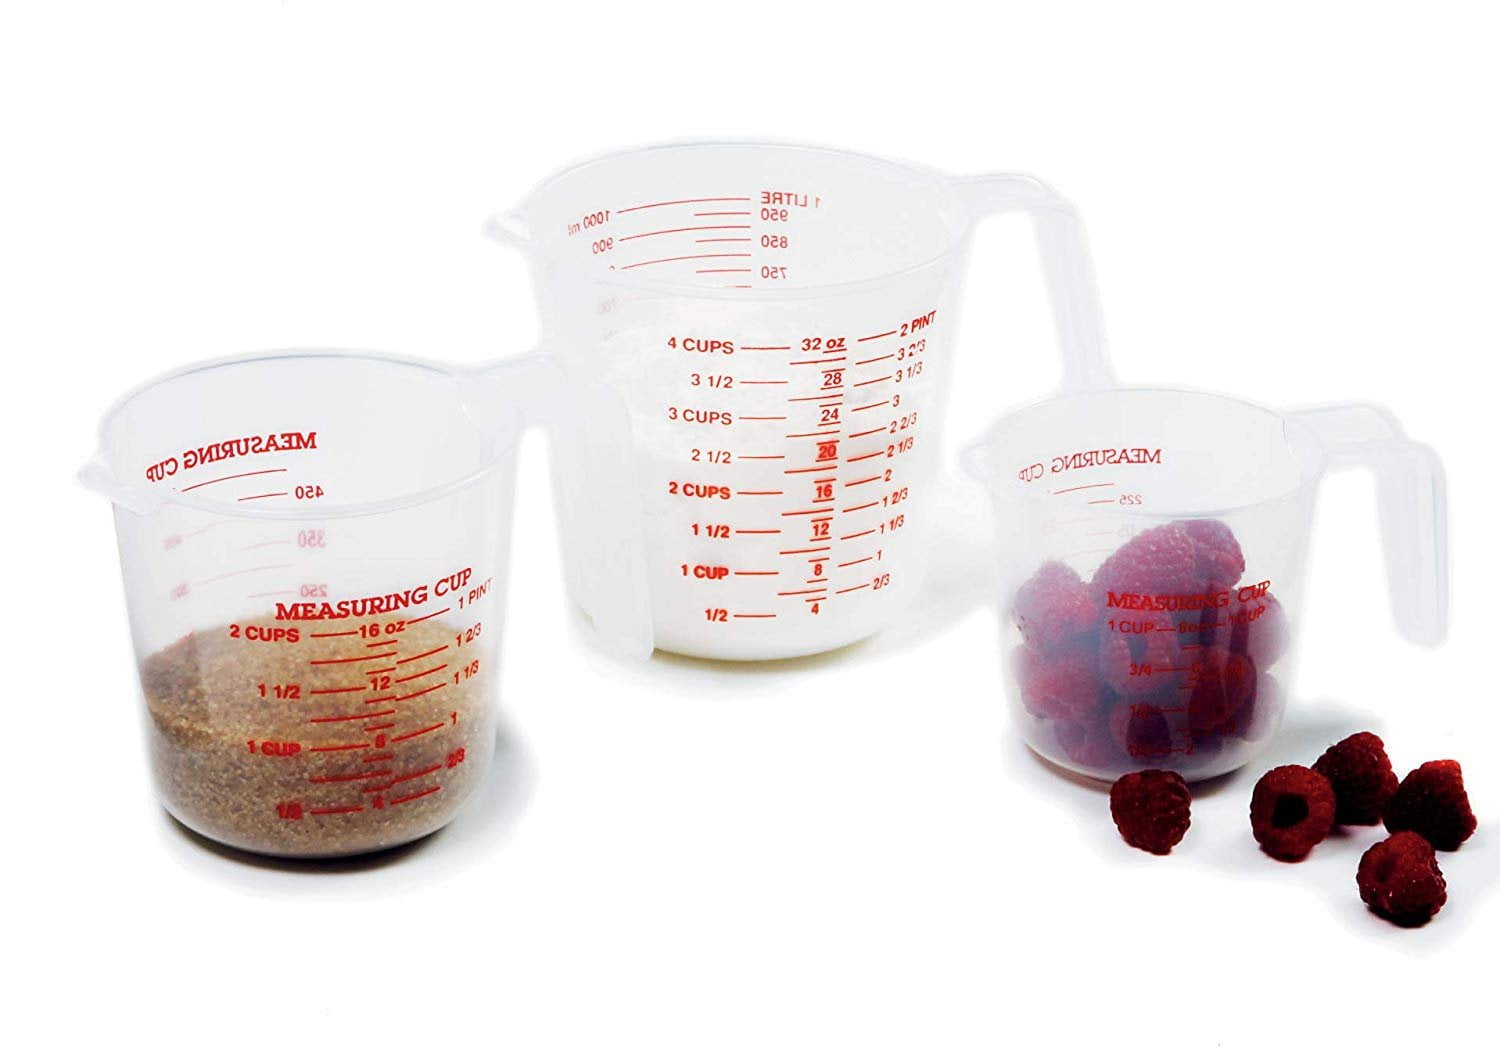 Norpro 2 Plastic Measuring Cup, Multicolored (12 Pack)